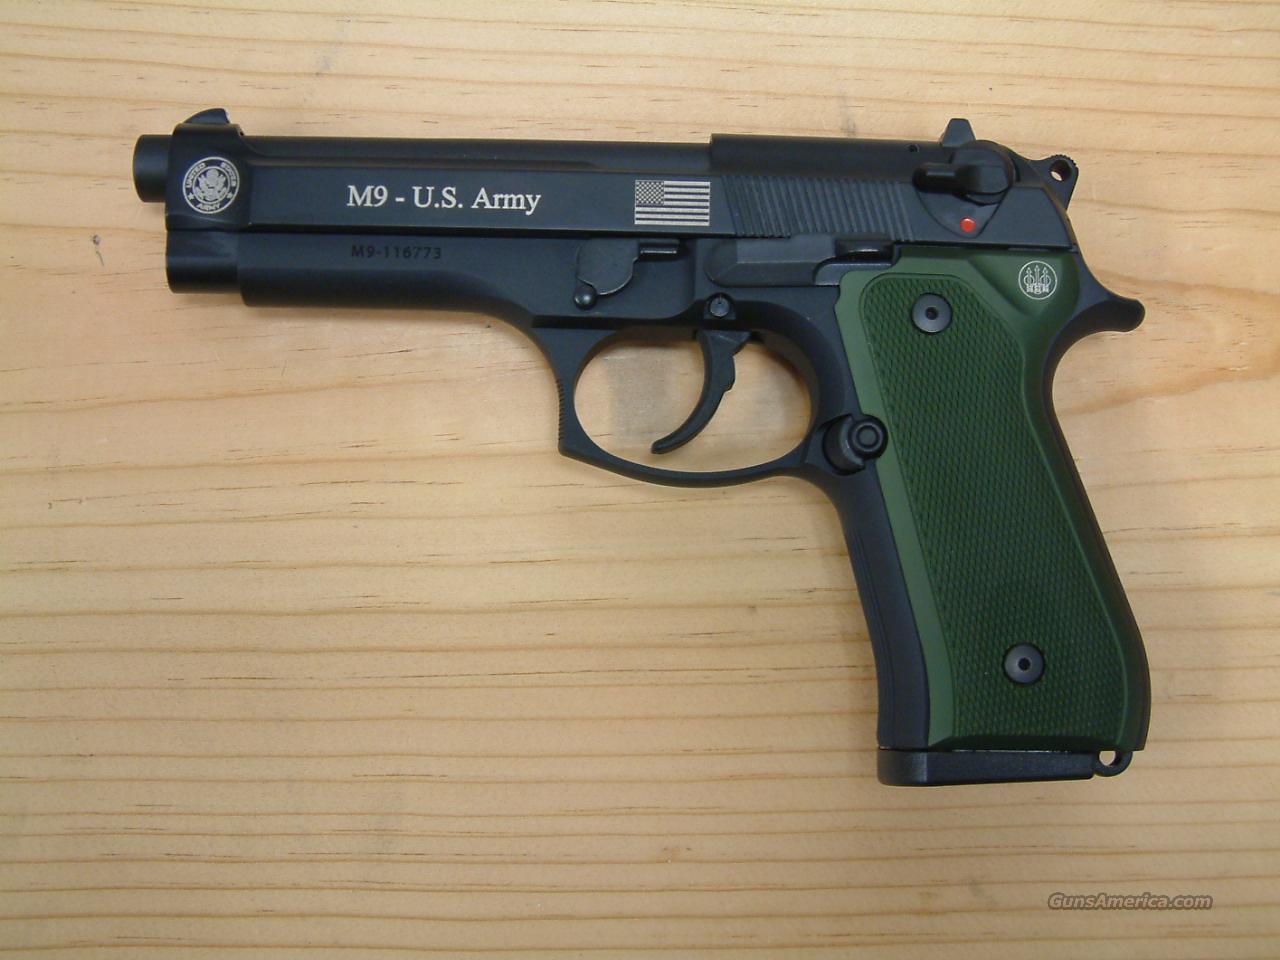 M9 U.S. Army Special Edition for sale